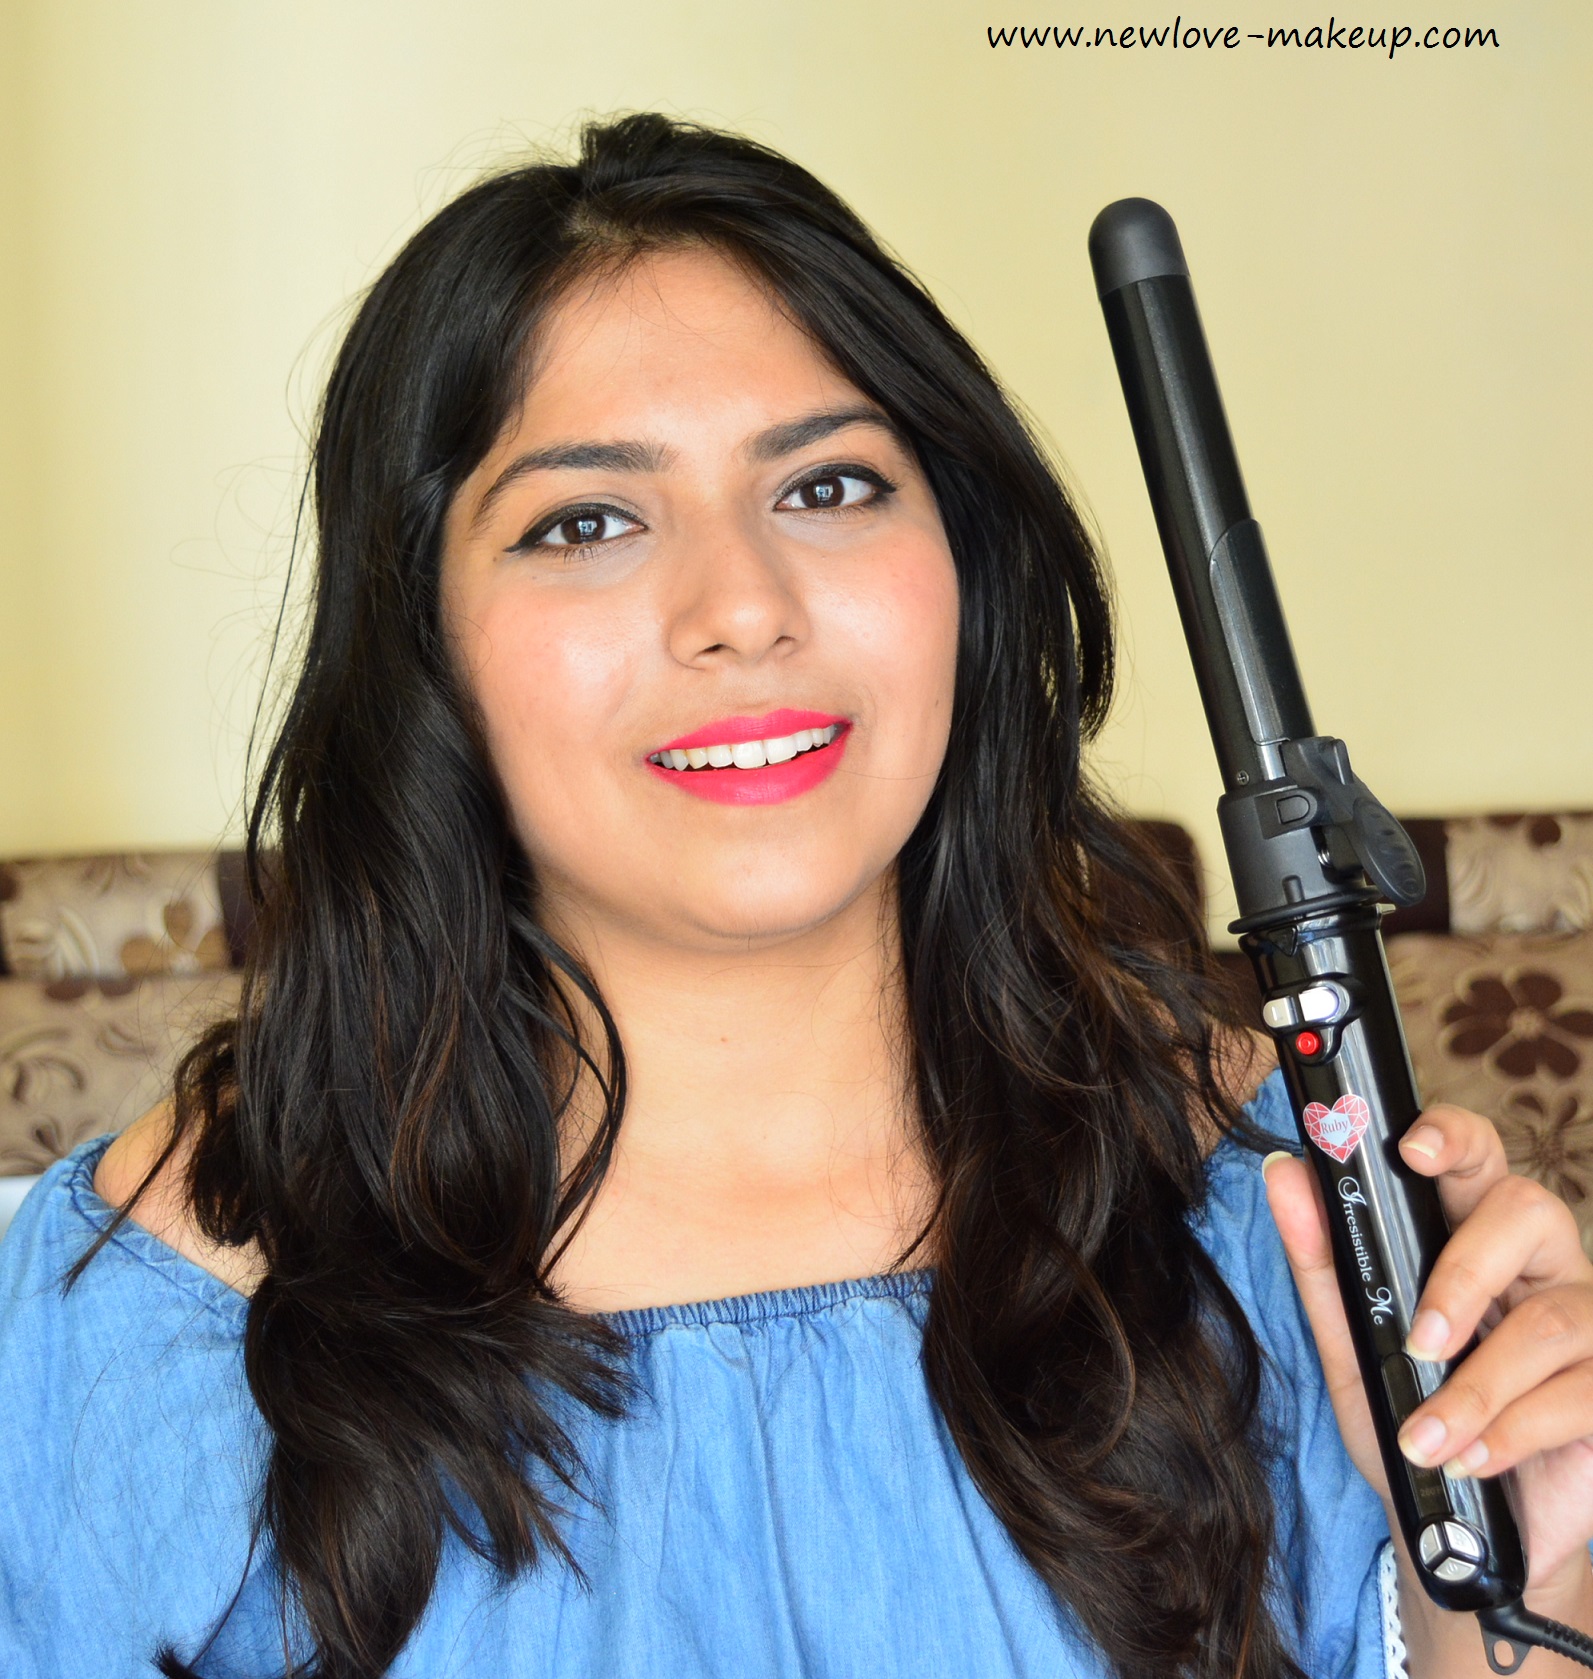 Irresistible Me Ruby Auto Rotating Curling Iron Review - New Love - Makeup